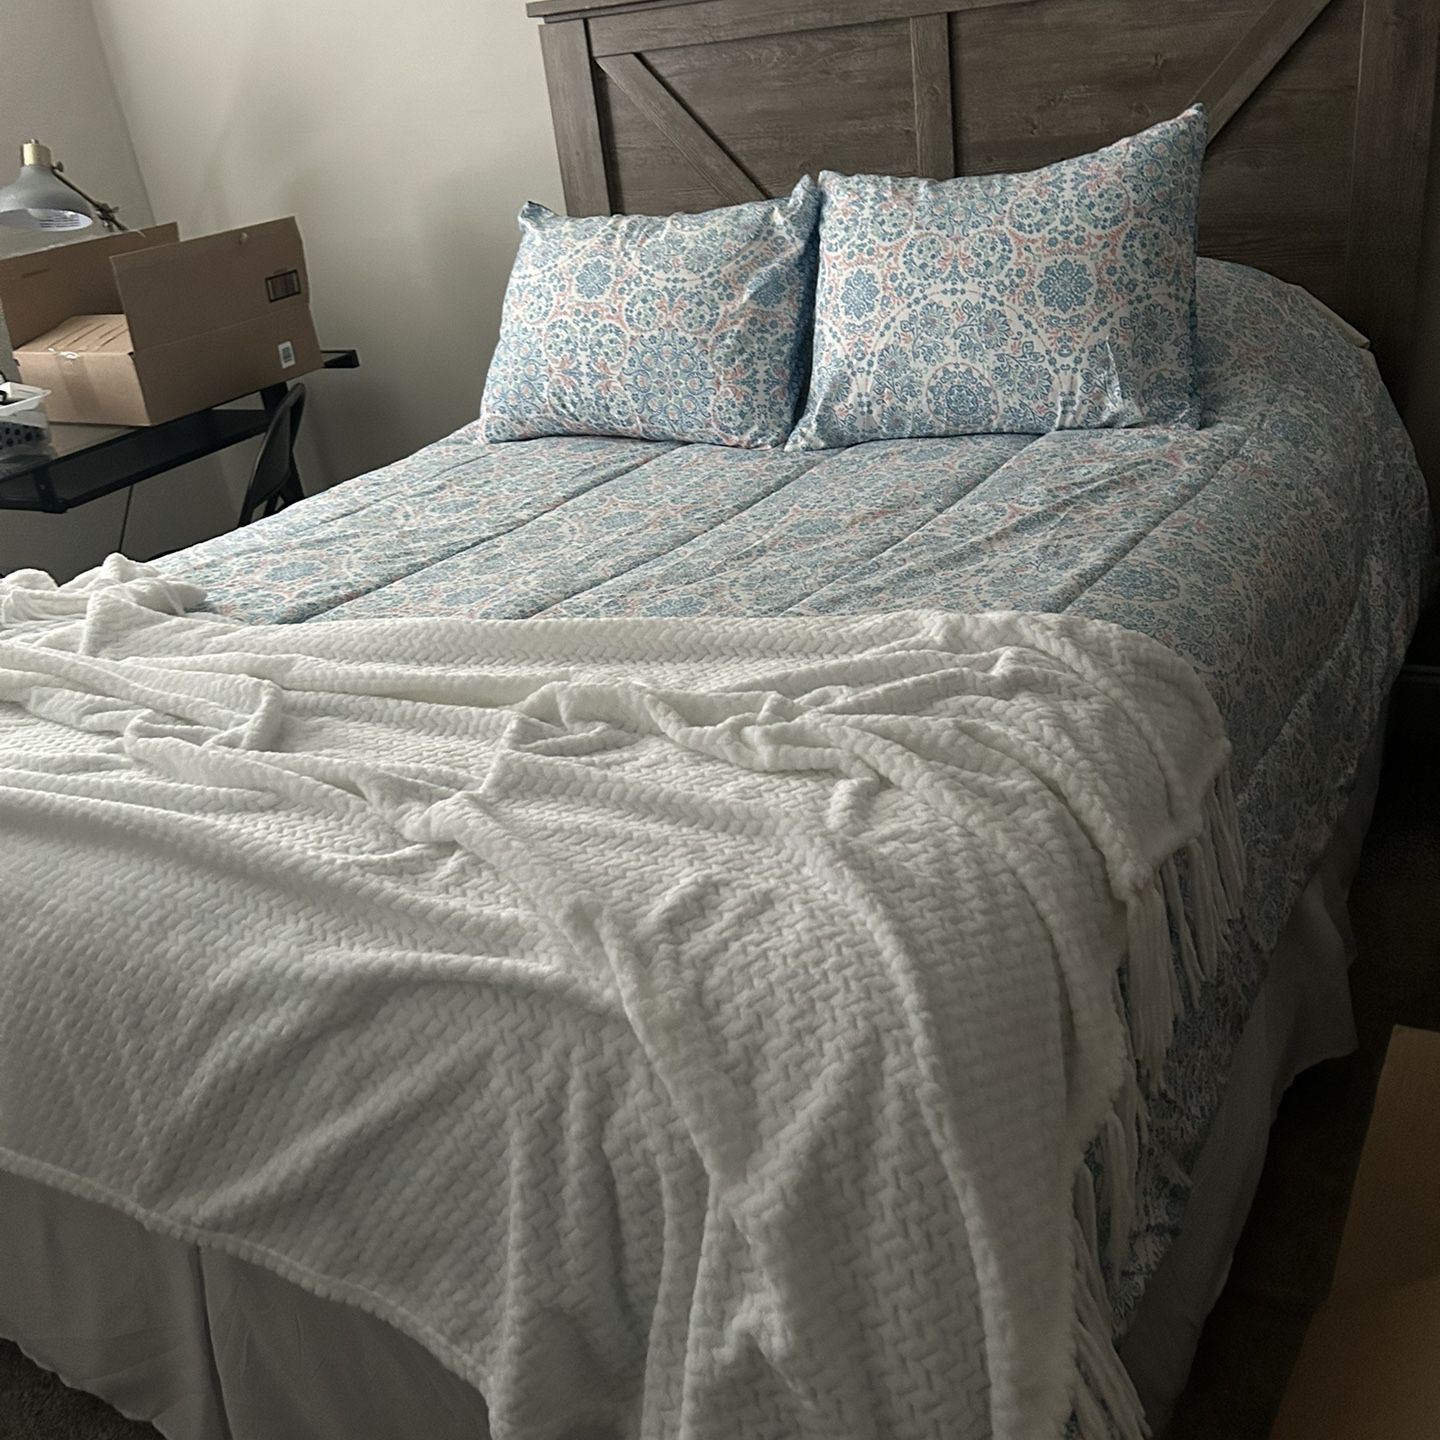 1Year Old Bedroom set-Great Condition! 